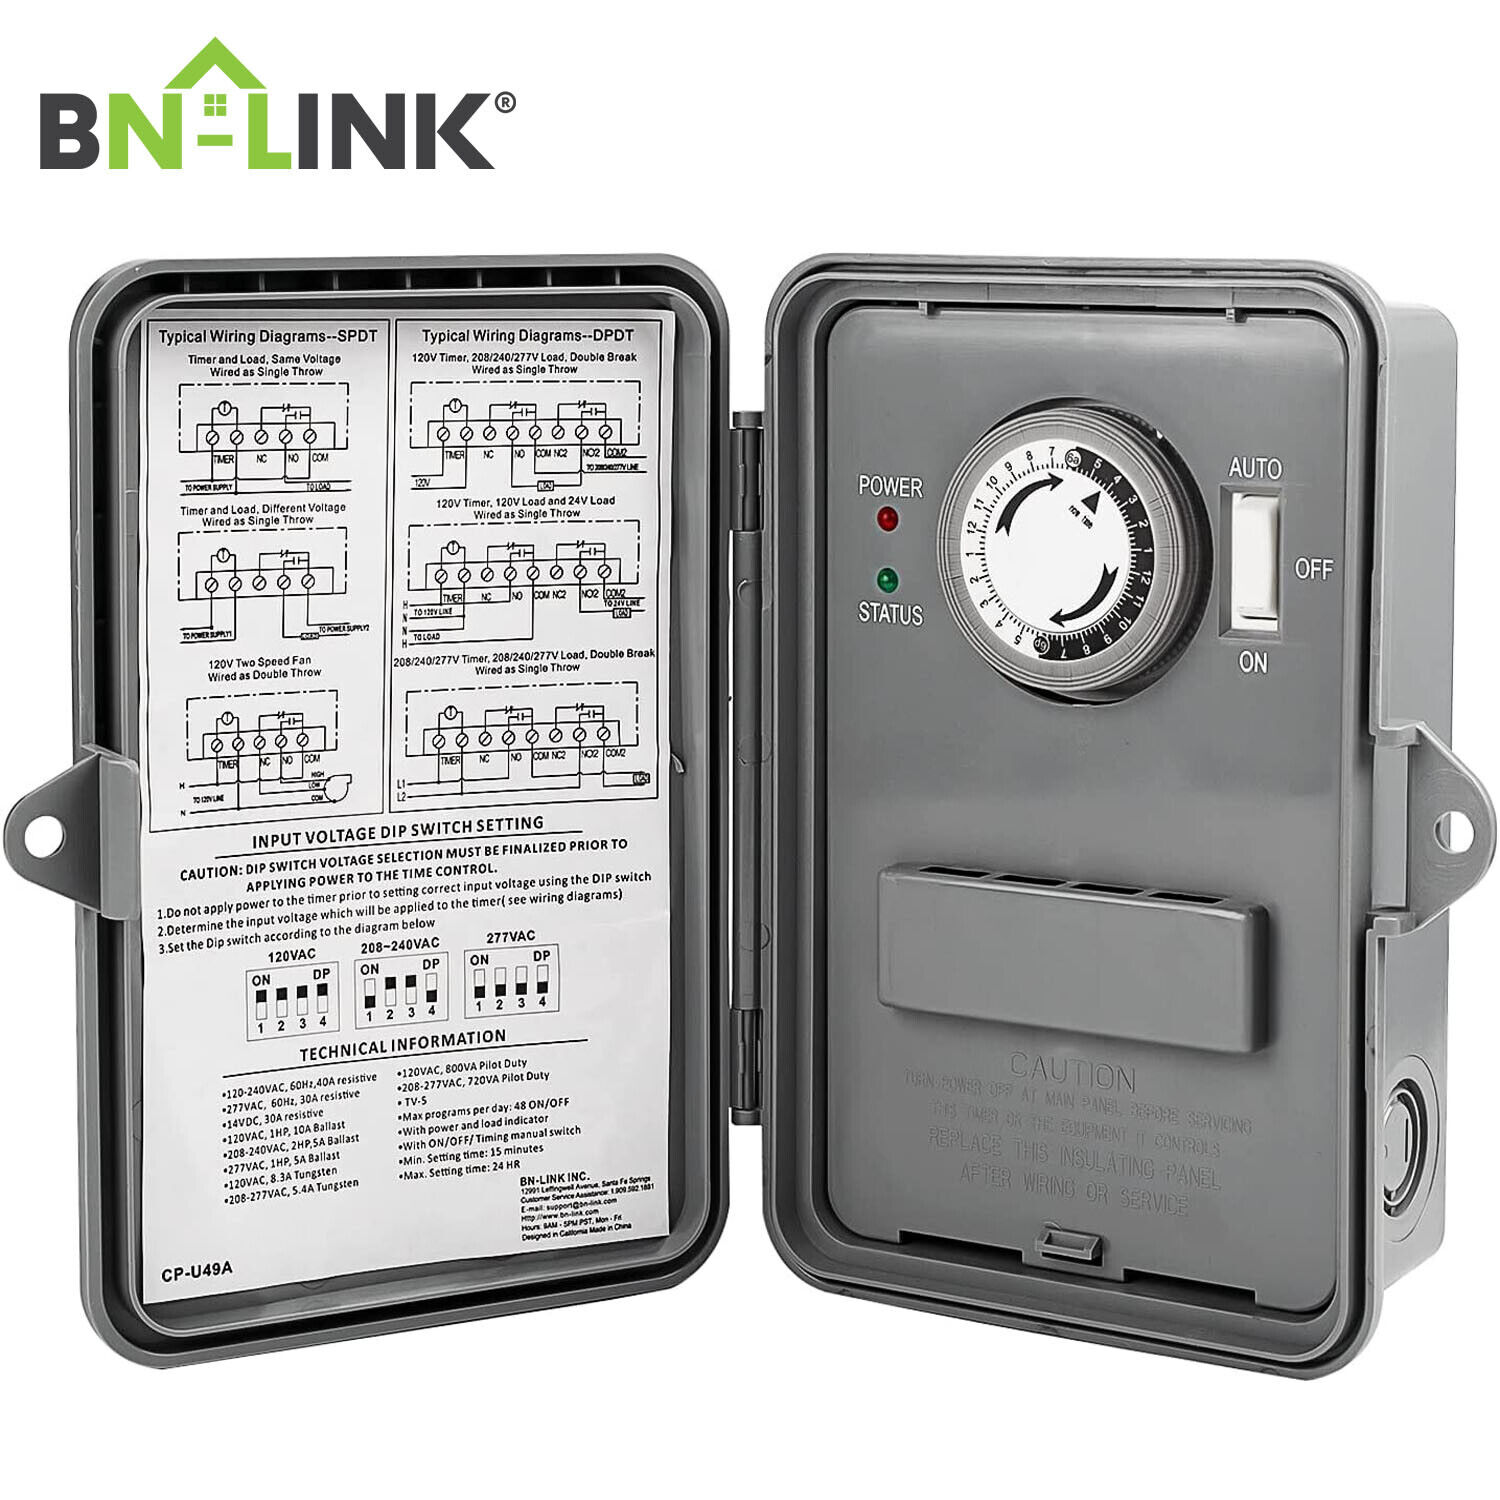 BN-LINK Pool Pump Timer Outdoor Timer Box, Heavy Duty 24Hr Programmable For Pool